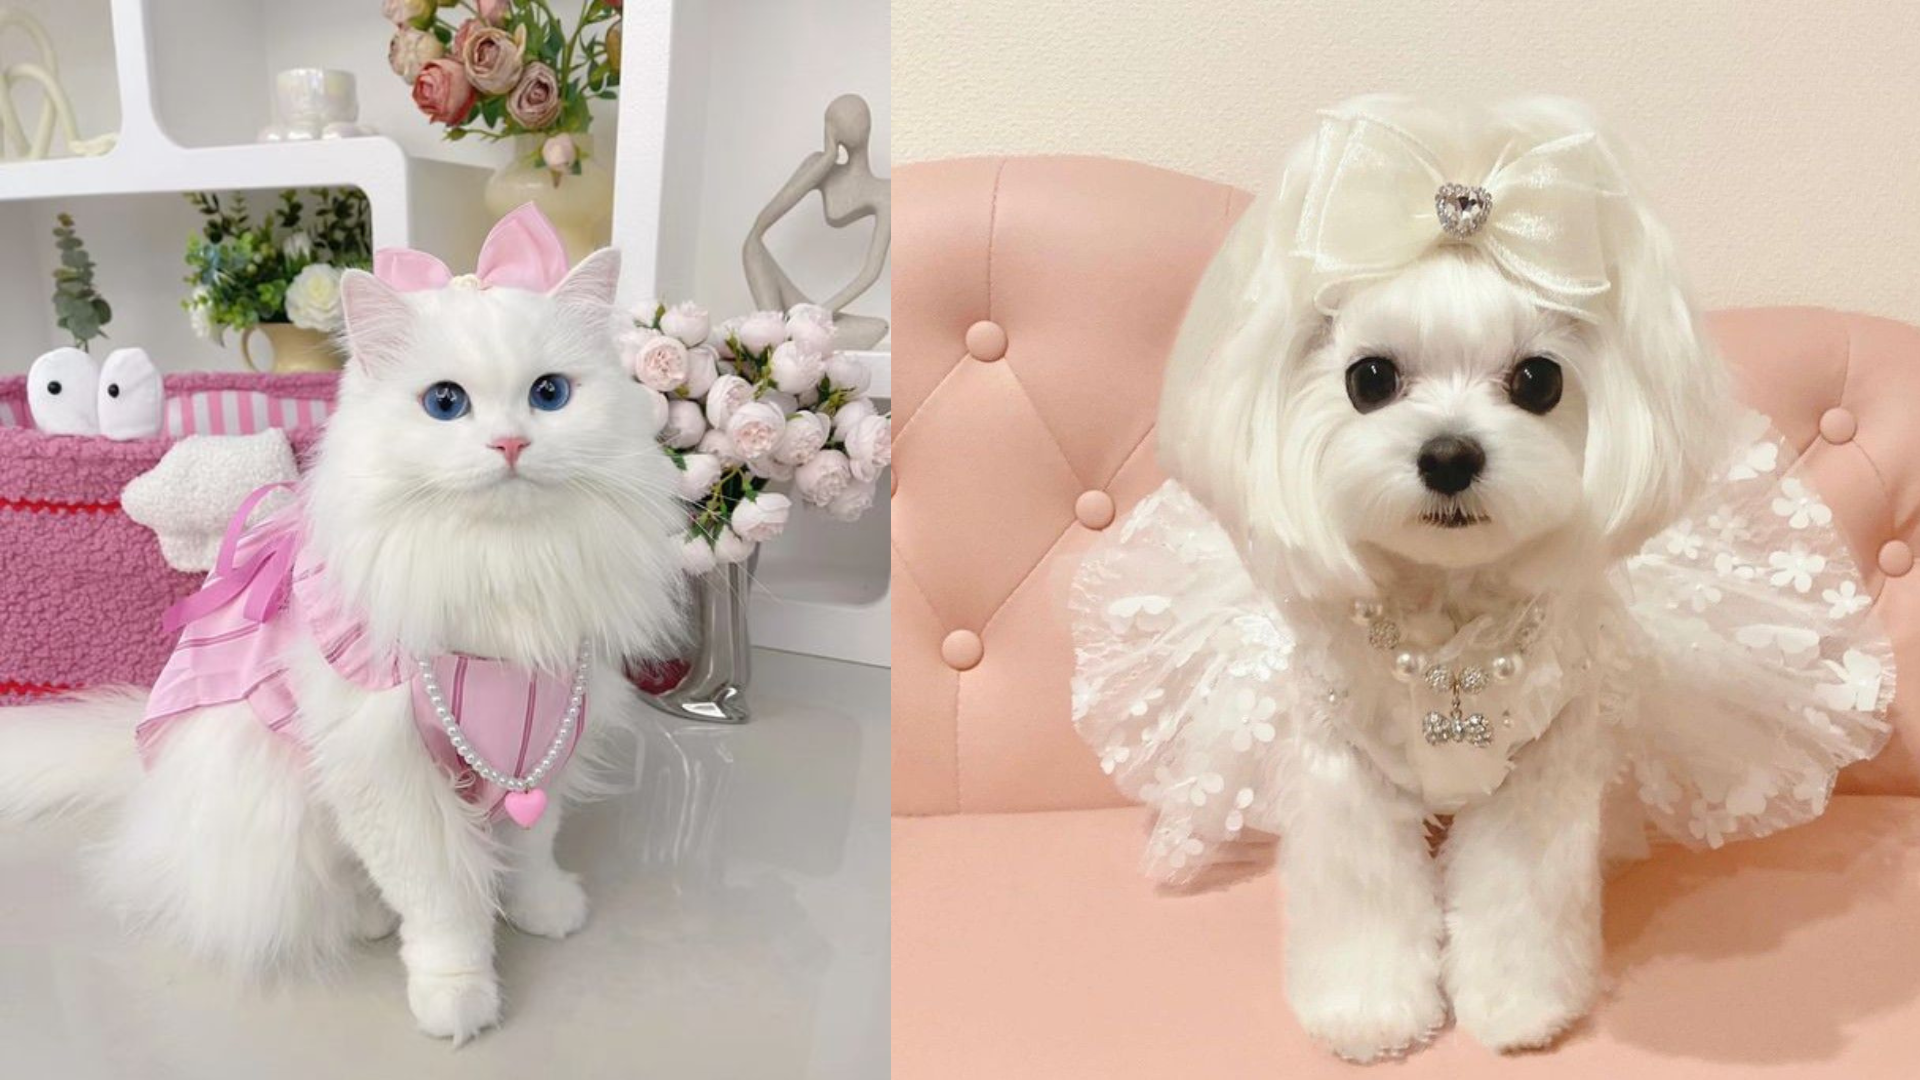 Wedding ceremony Dress Your Furry Friend in Style: Perfect Top 11 Attire looks for Pets